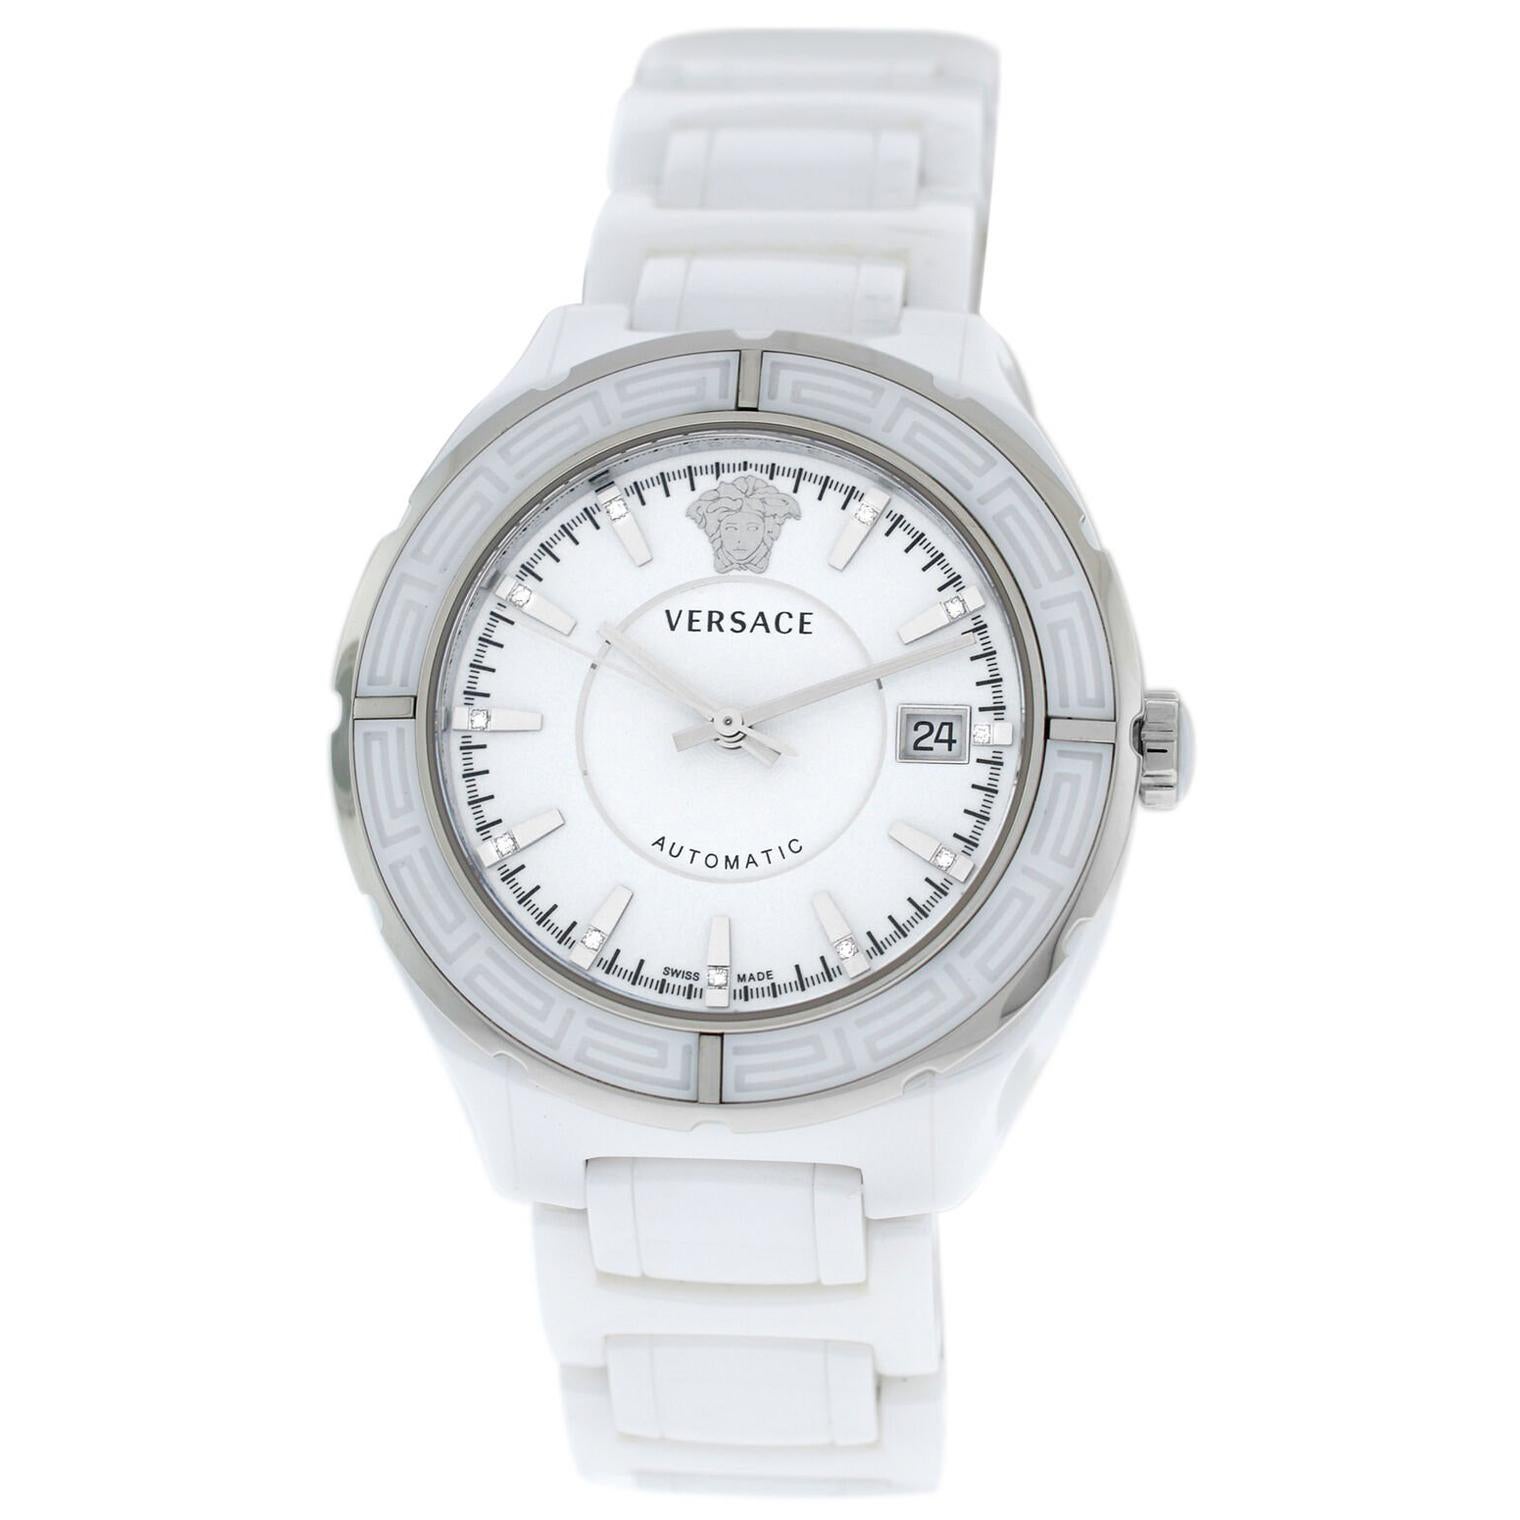 New Versace DV One Ceramic Diamond Automatic Date Watch For Sale